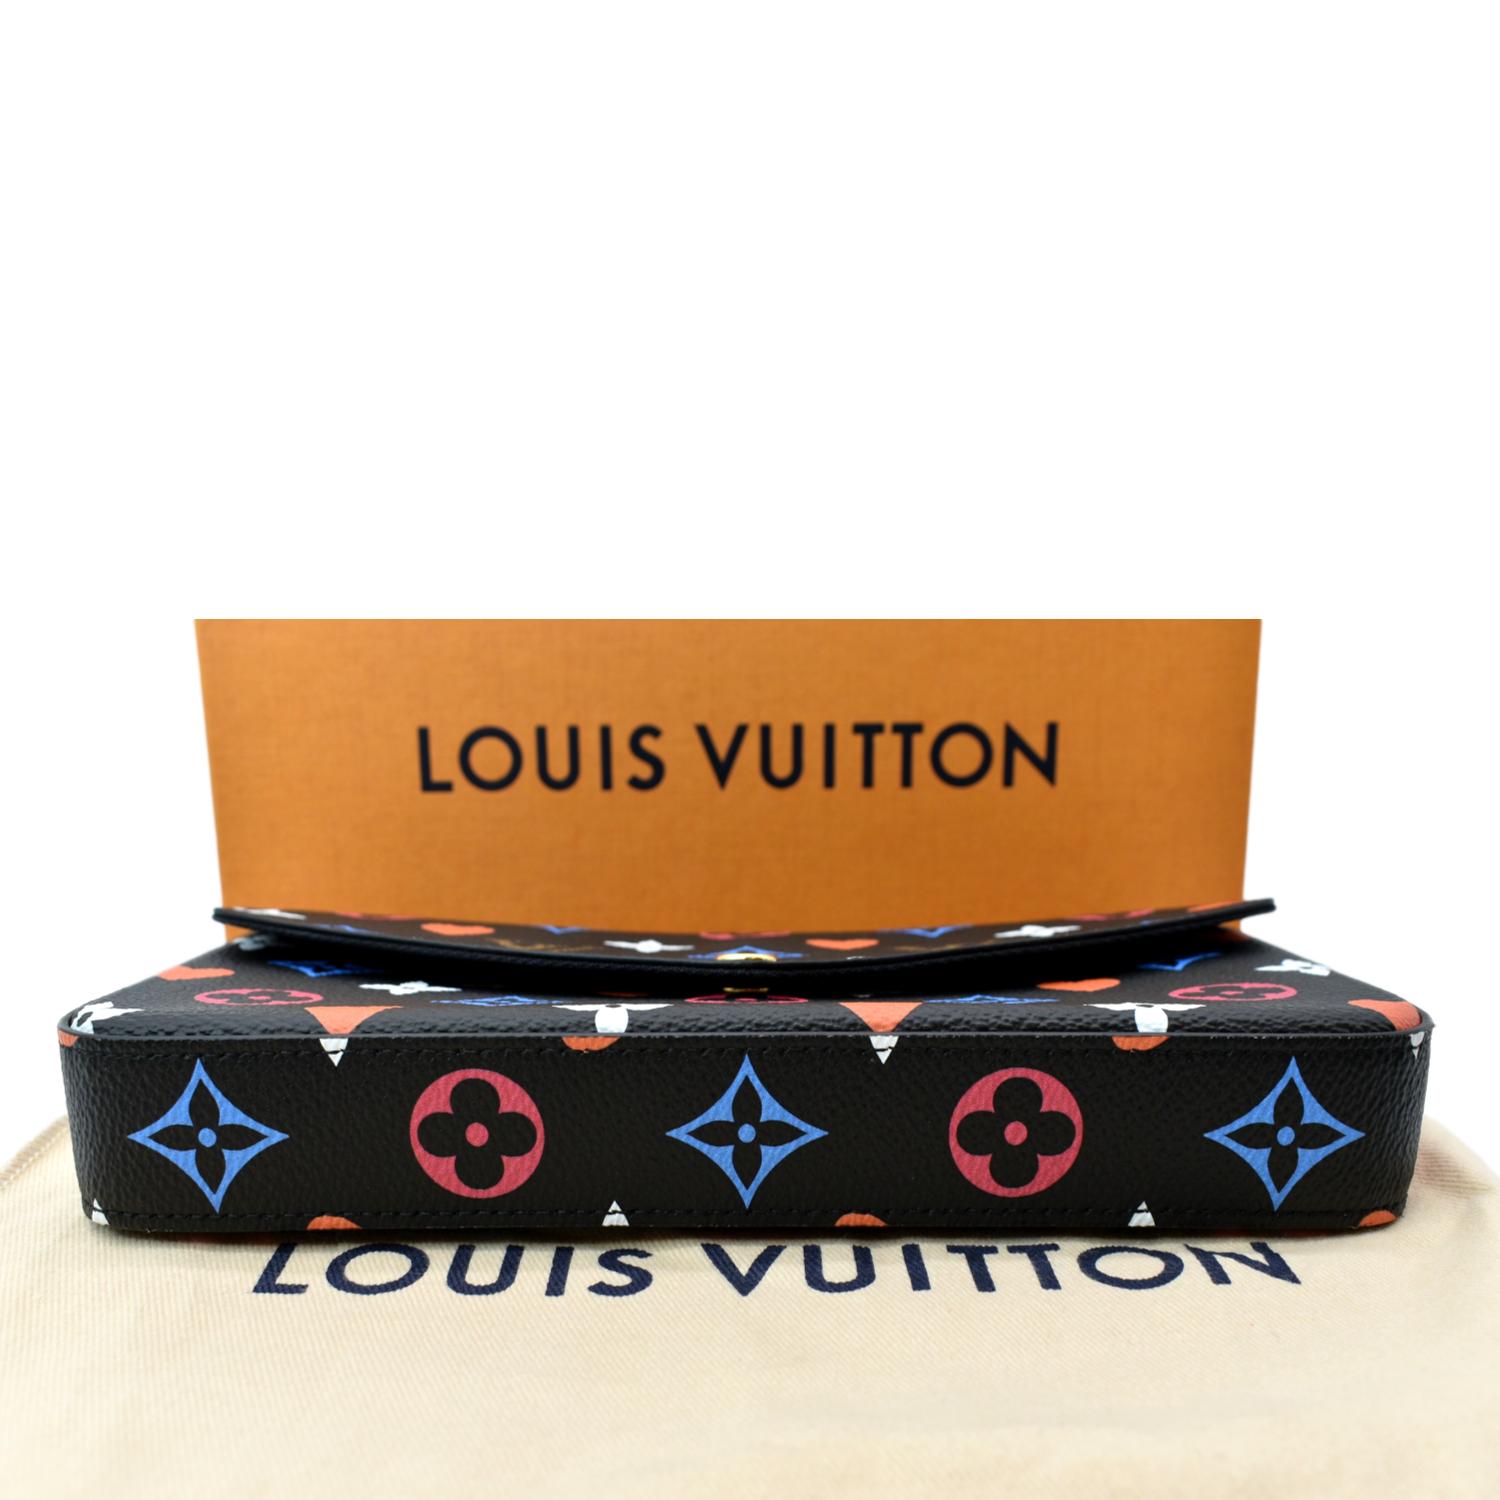 LOUIS VUITTON GAME ON FELICIE POCHETTE, WHAT FITS